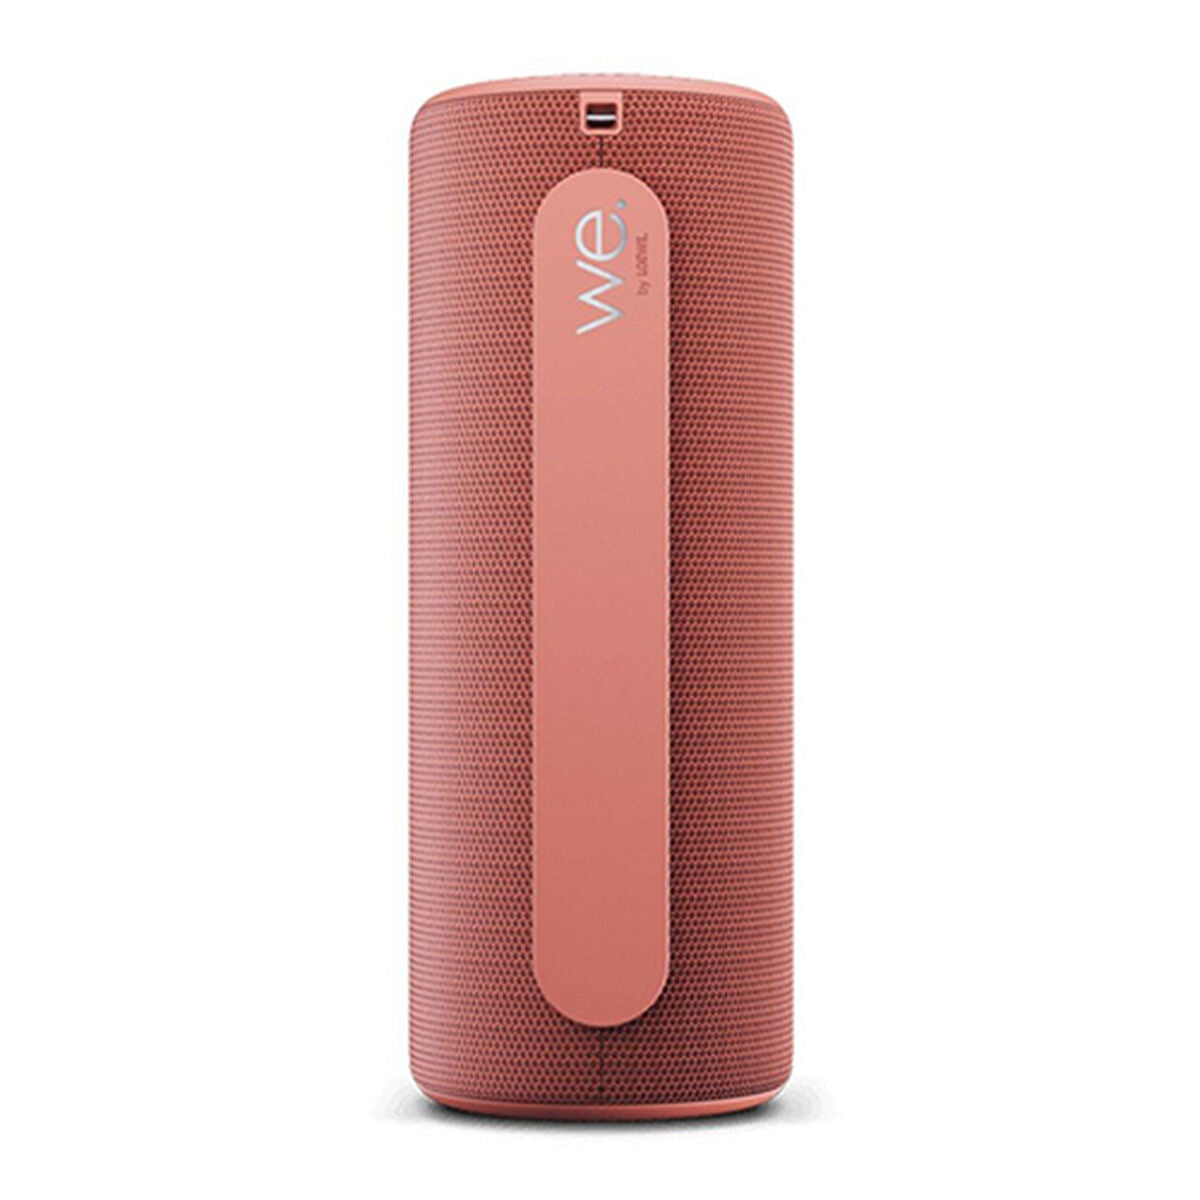 Portable Bluetooth Speakers Loewe 60701R10 Red 40 W, Loewe, Electronics, Mobile communication and accessories, portable-bluetooth-speakers-loewe-60701r10-red-40-w, Brand_Loewe, category-reference-2609, category-reference-2882, category-reference-2923, category-reference-t-19653, category-reference-t-21311, category-reference-t-25527, category-reference-t-4036, category-reference-t-4037, Condition_NEW, entertainment, music, Price_100 - 200, telephones & tablets, wifi y bluetooth, RiotNook